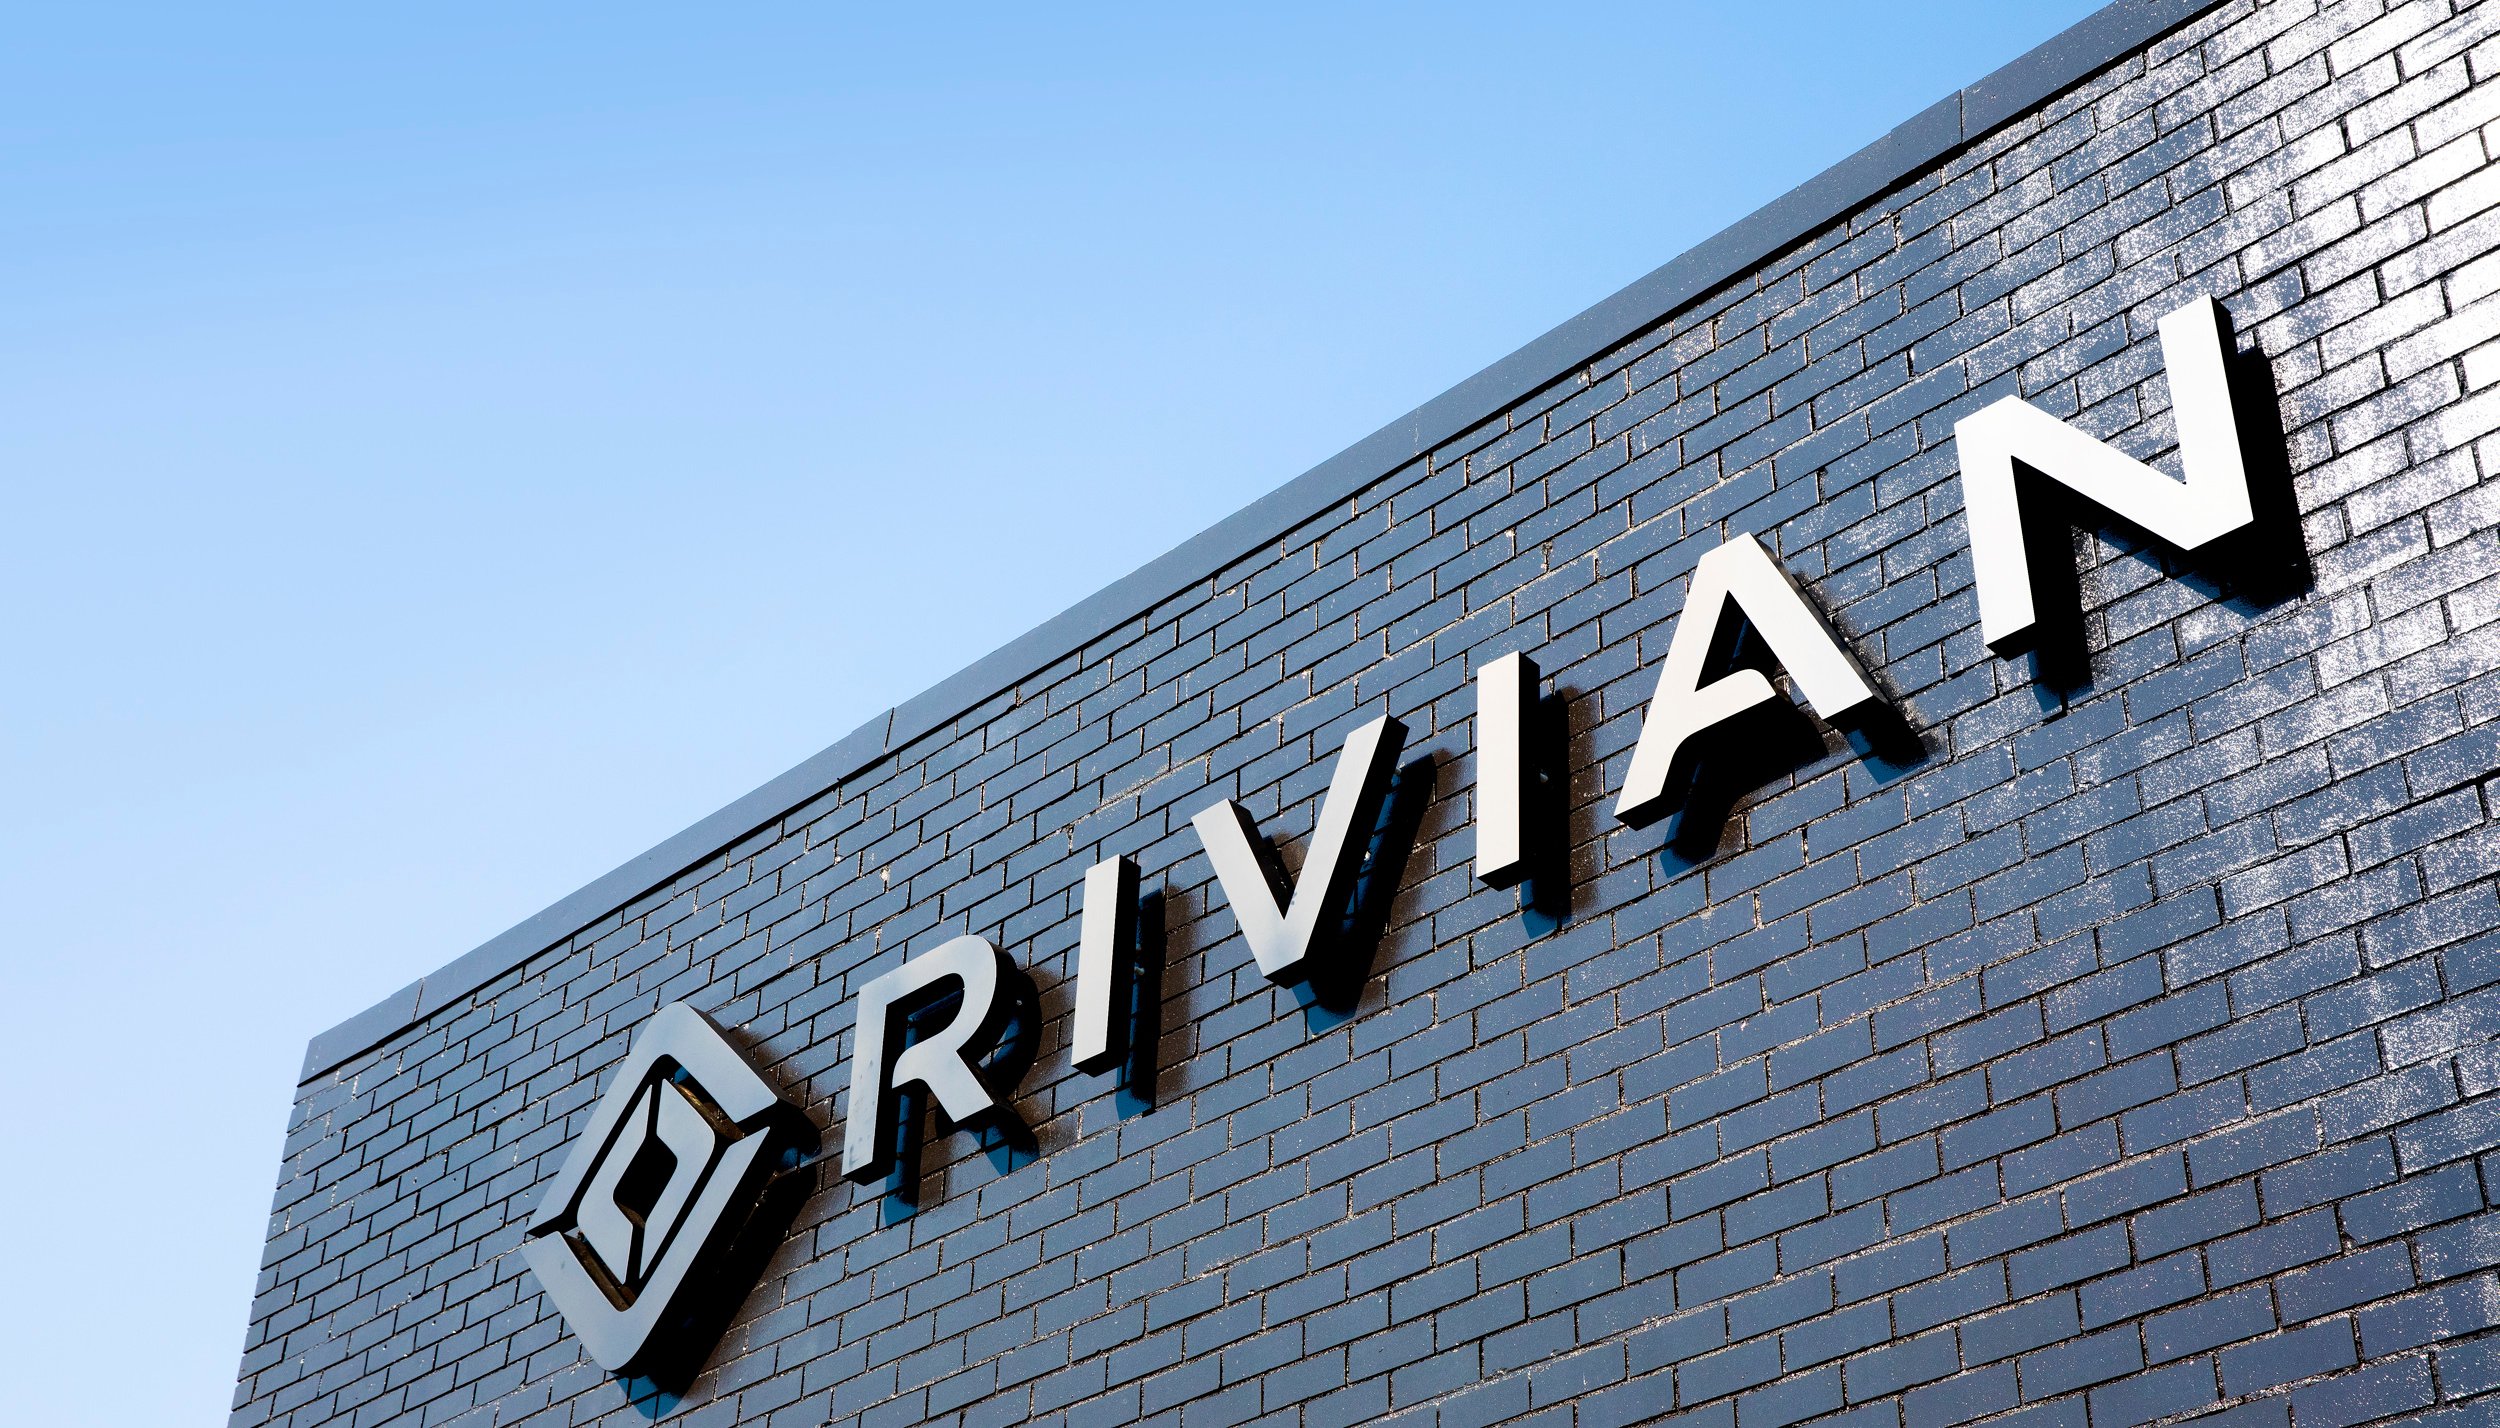 Read RIVIAN OPENS NEW SERVICE CENTERS INCLUDING A NEW EUROPEAN LOCATION by Rivian